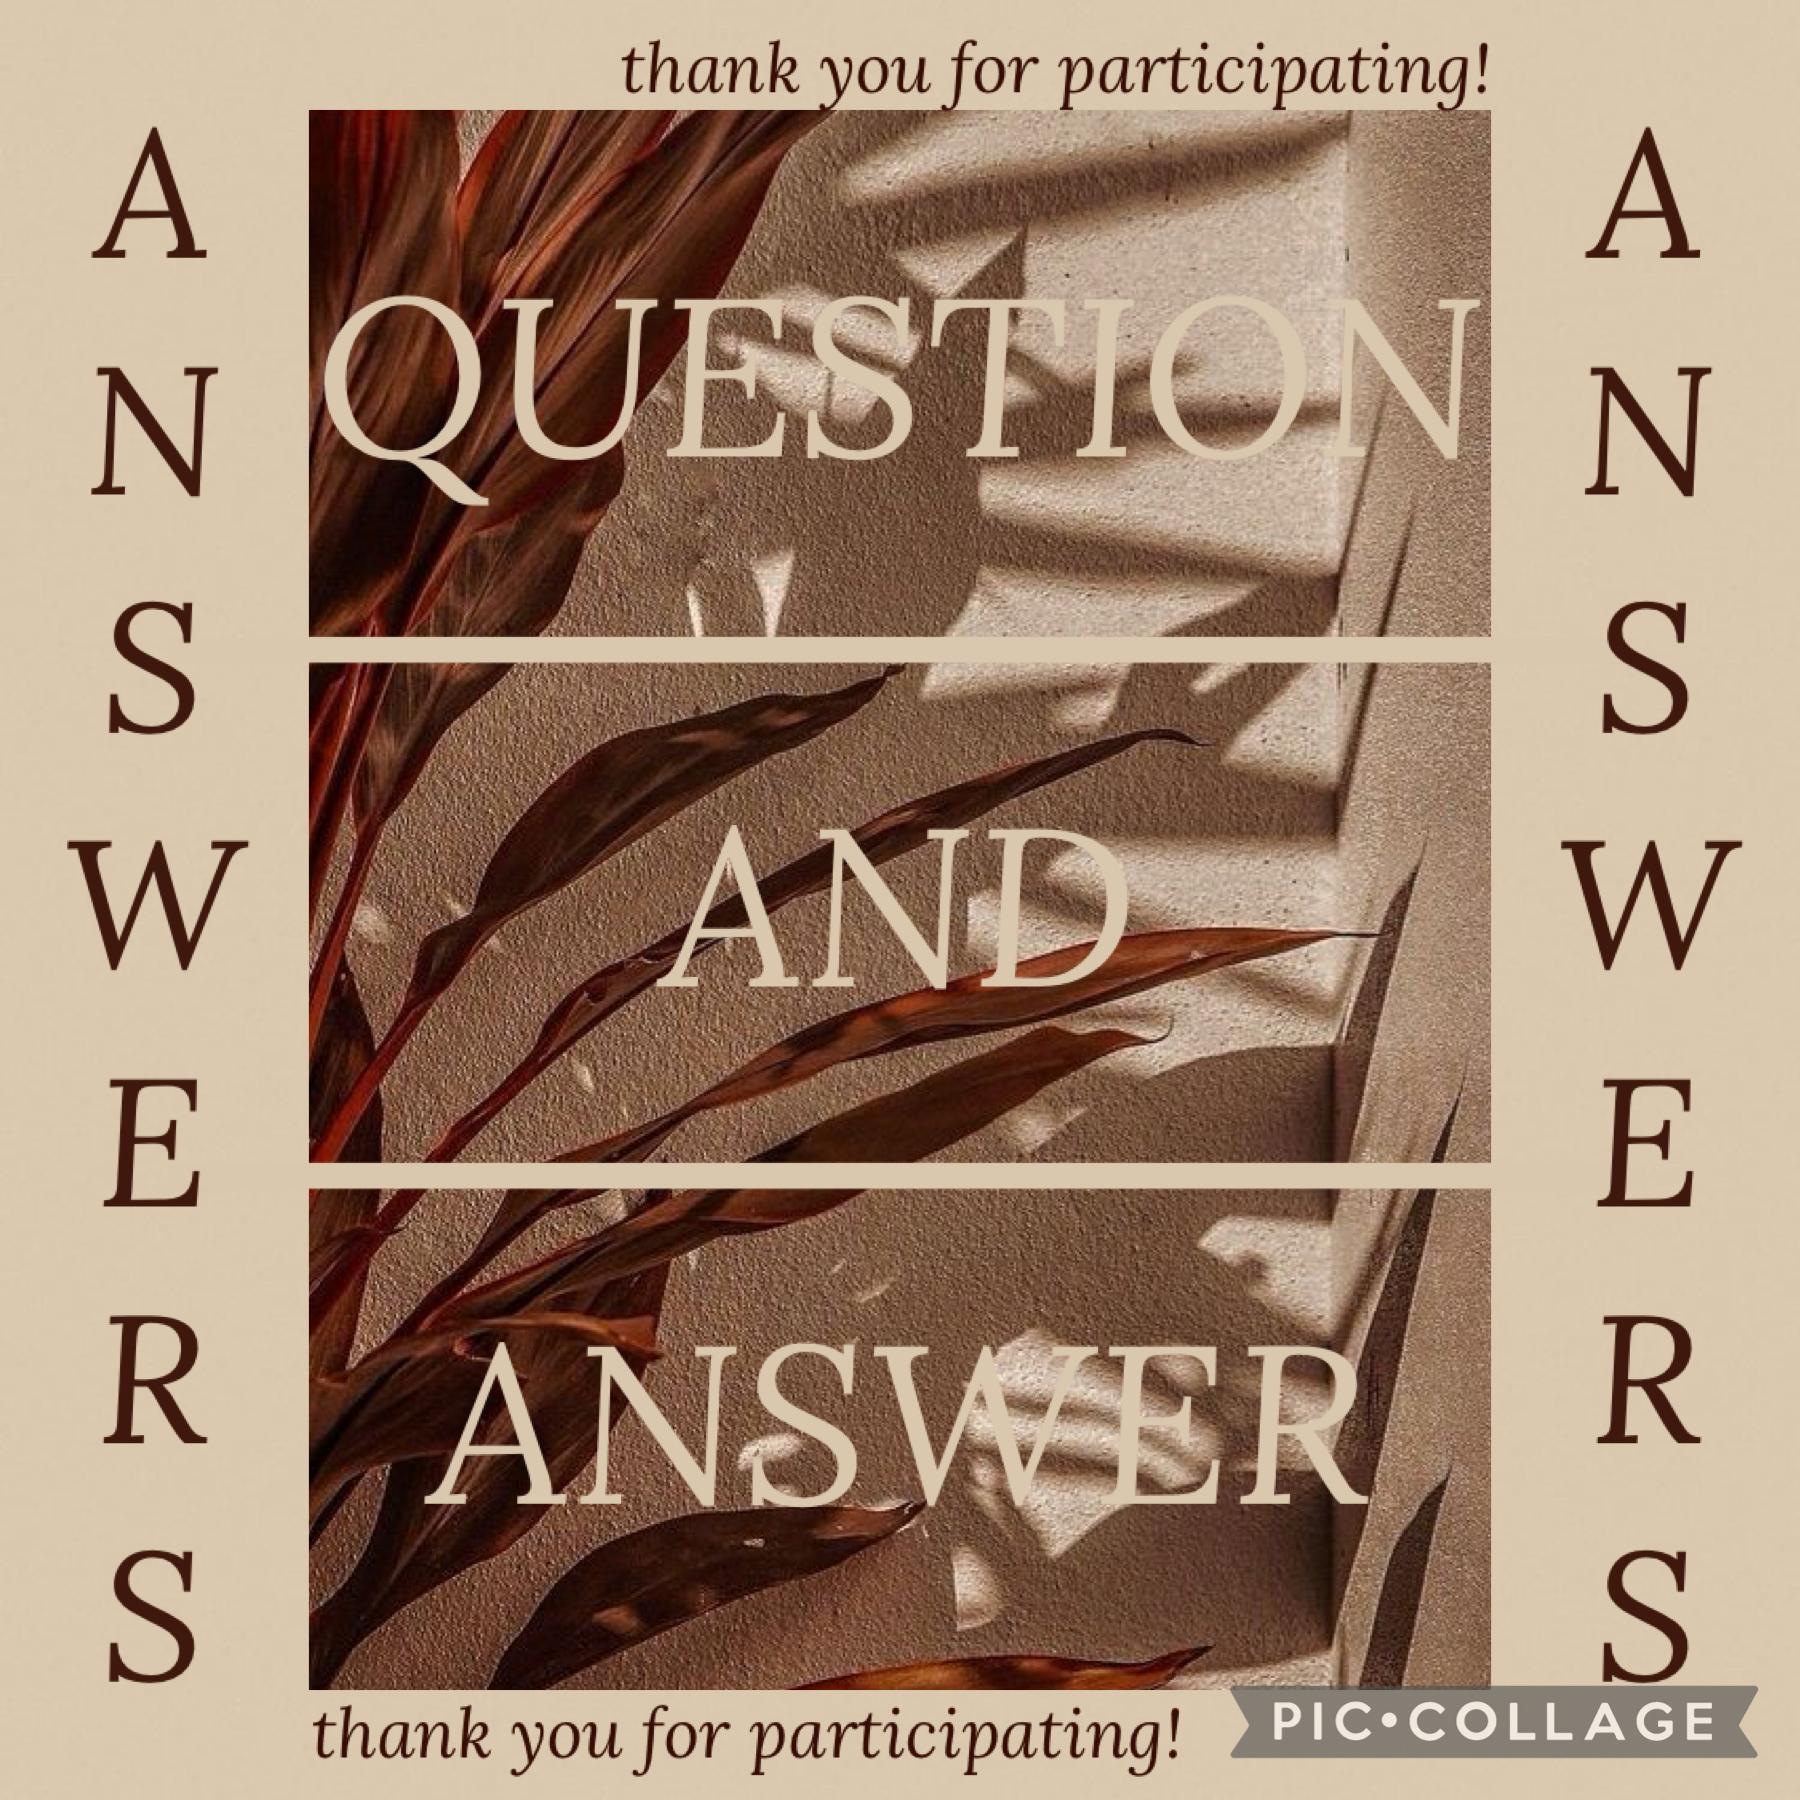 11/25/23 | Answers are in the remixes! Thank you for asking, I always love me a good q&a! Hoped you learned a little more about me. And I can’t believe this  would mark 5 years of this account. 